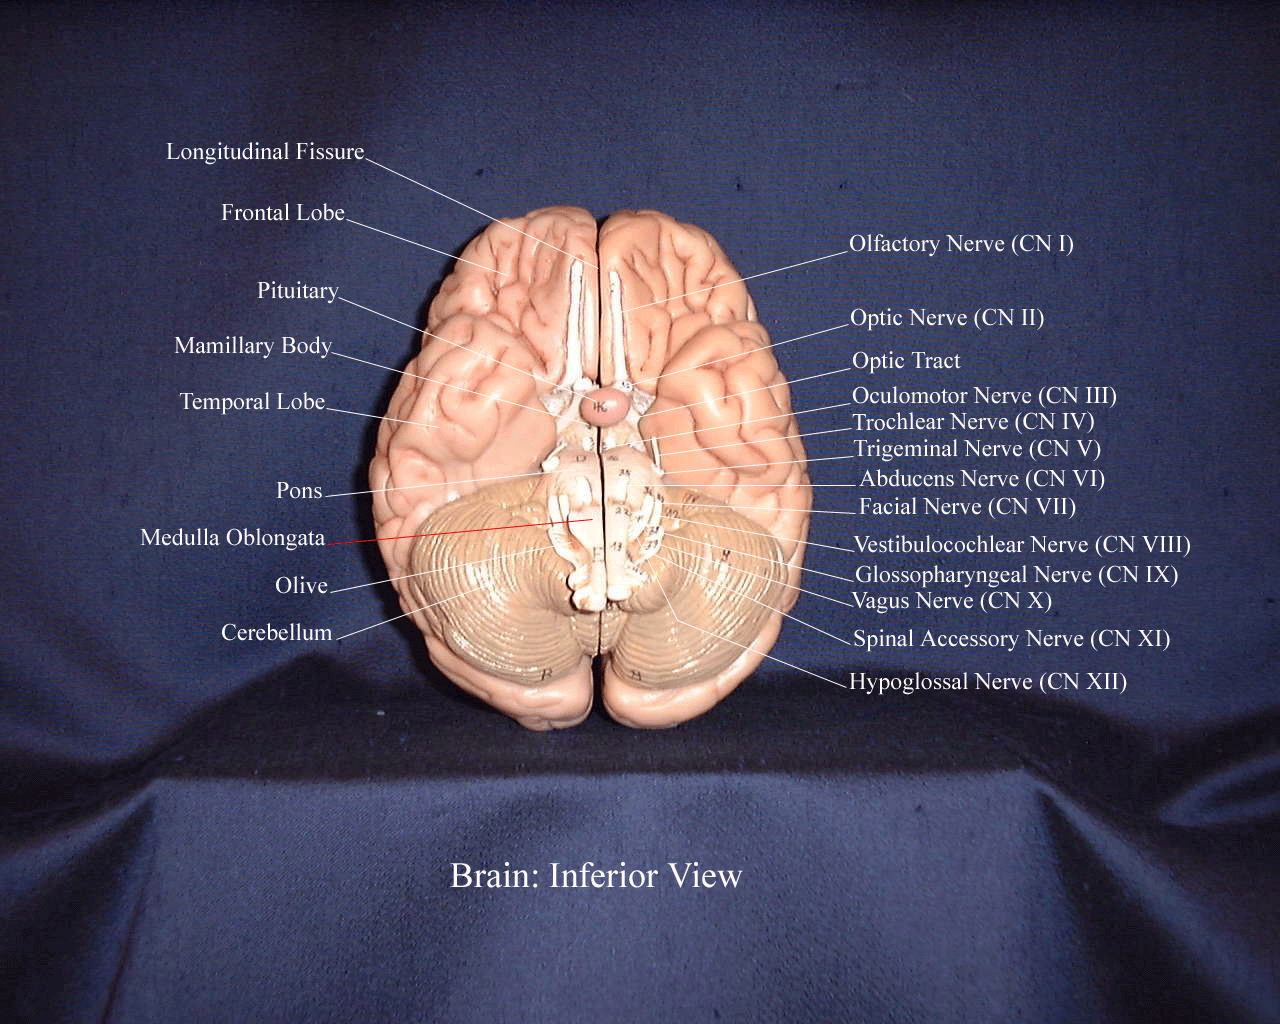 a labeled picture of a brain model from an inferior view